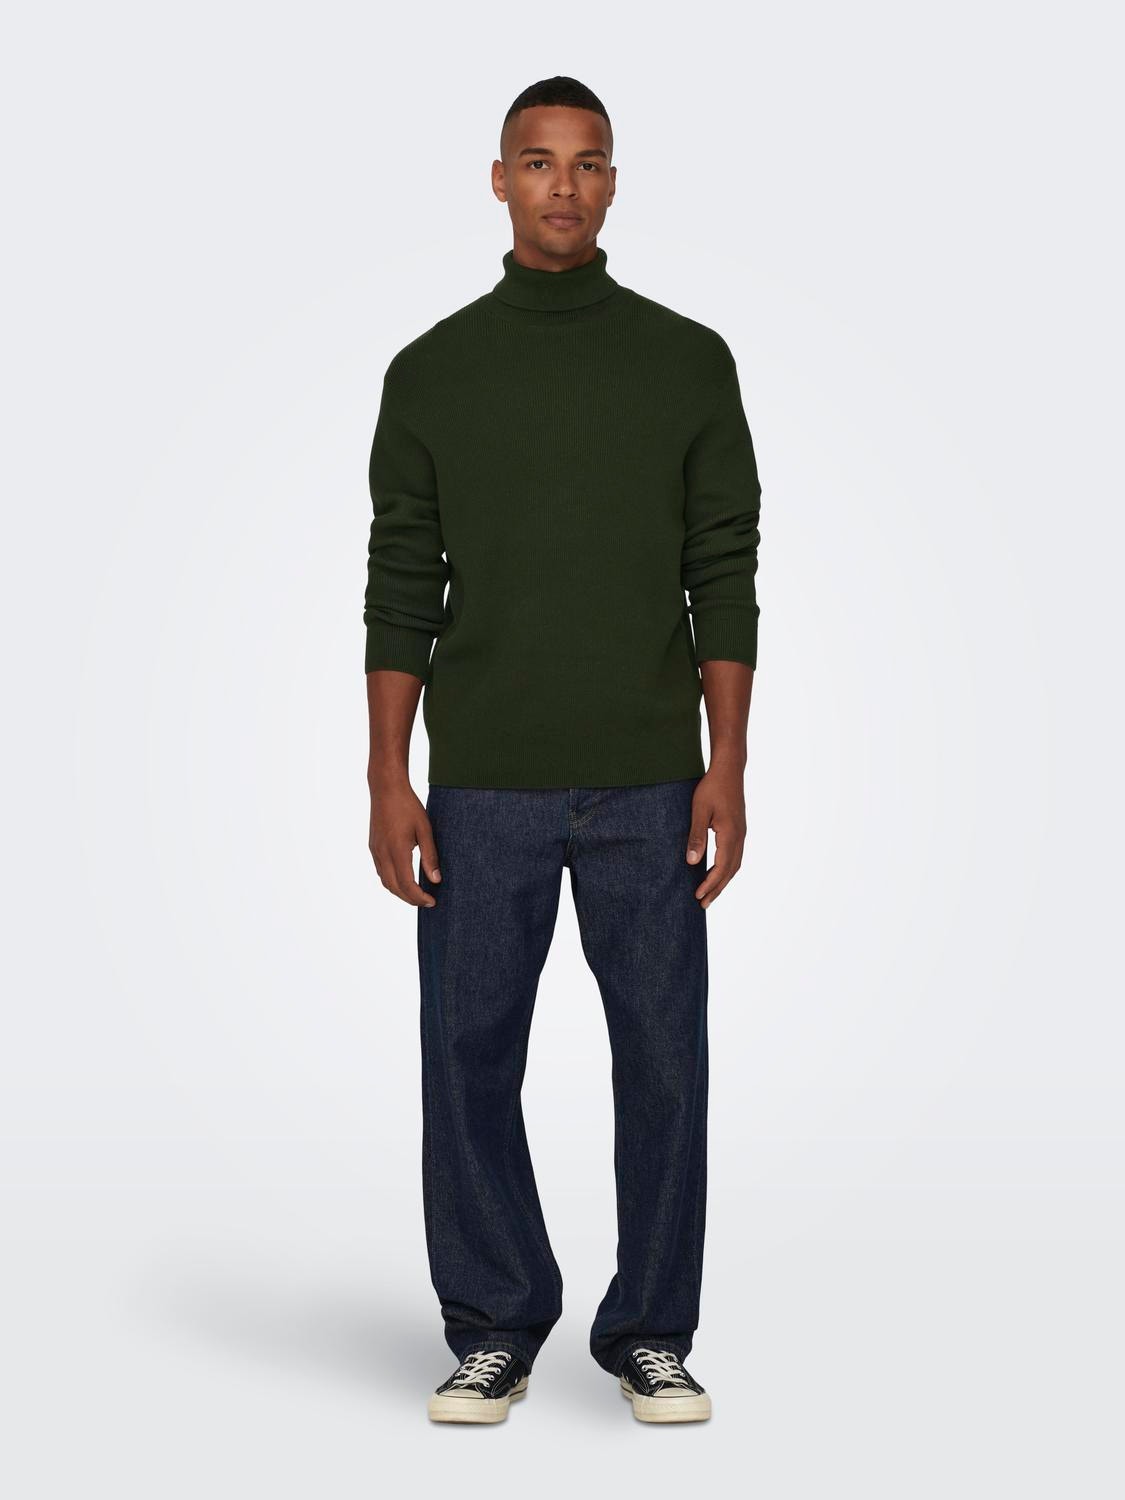 ONLY & SONS Rolkraag Pullover -Rosin - 22023202